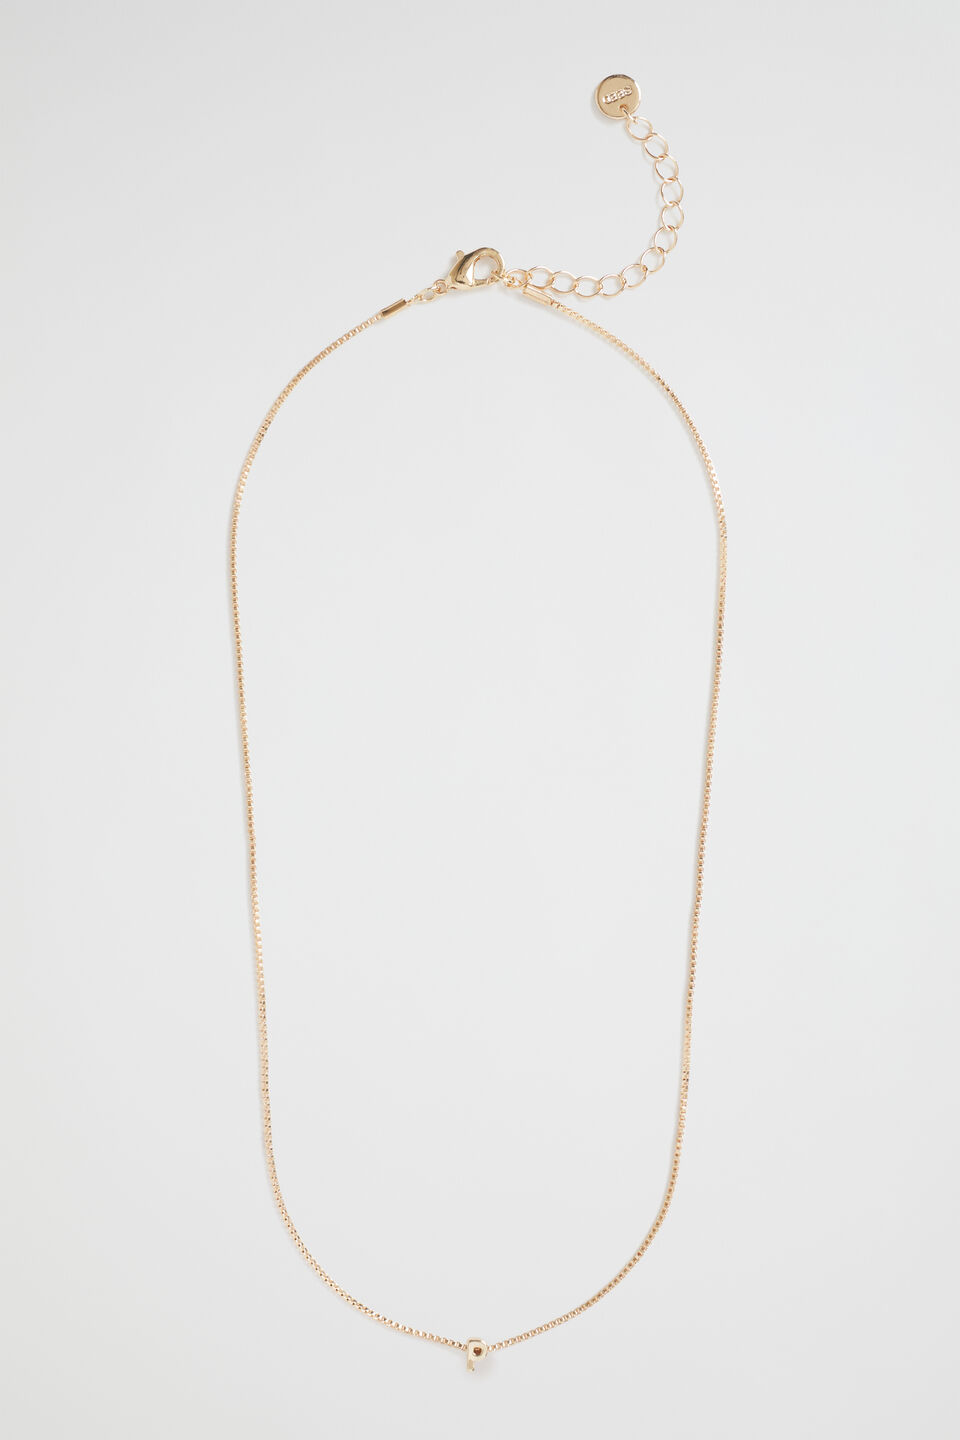 Gold Initial Necklace  P